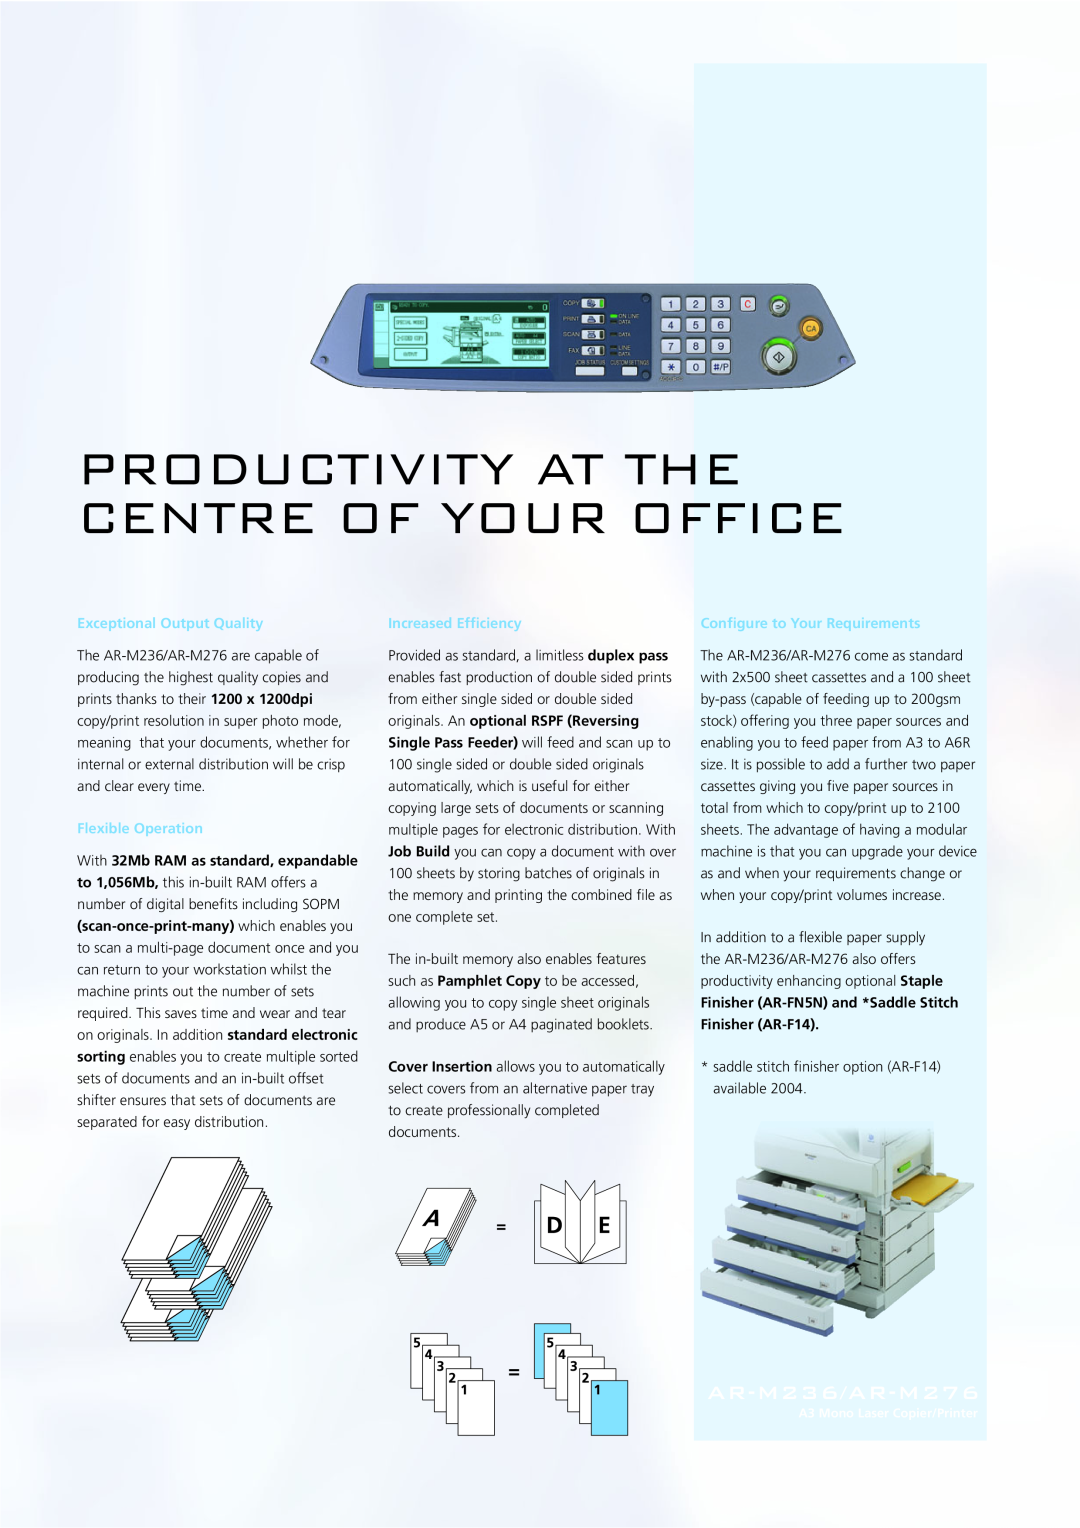 Sharp manual Productivity At The Centre Of Your Office, Exceptional Output Quality, Flexible Operation, AR-M236/AR-M276 